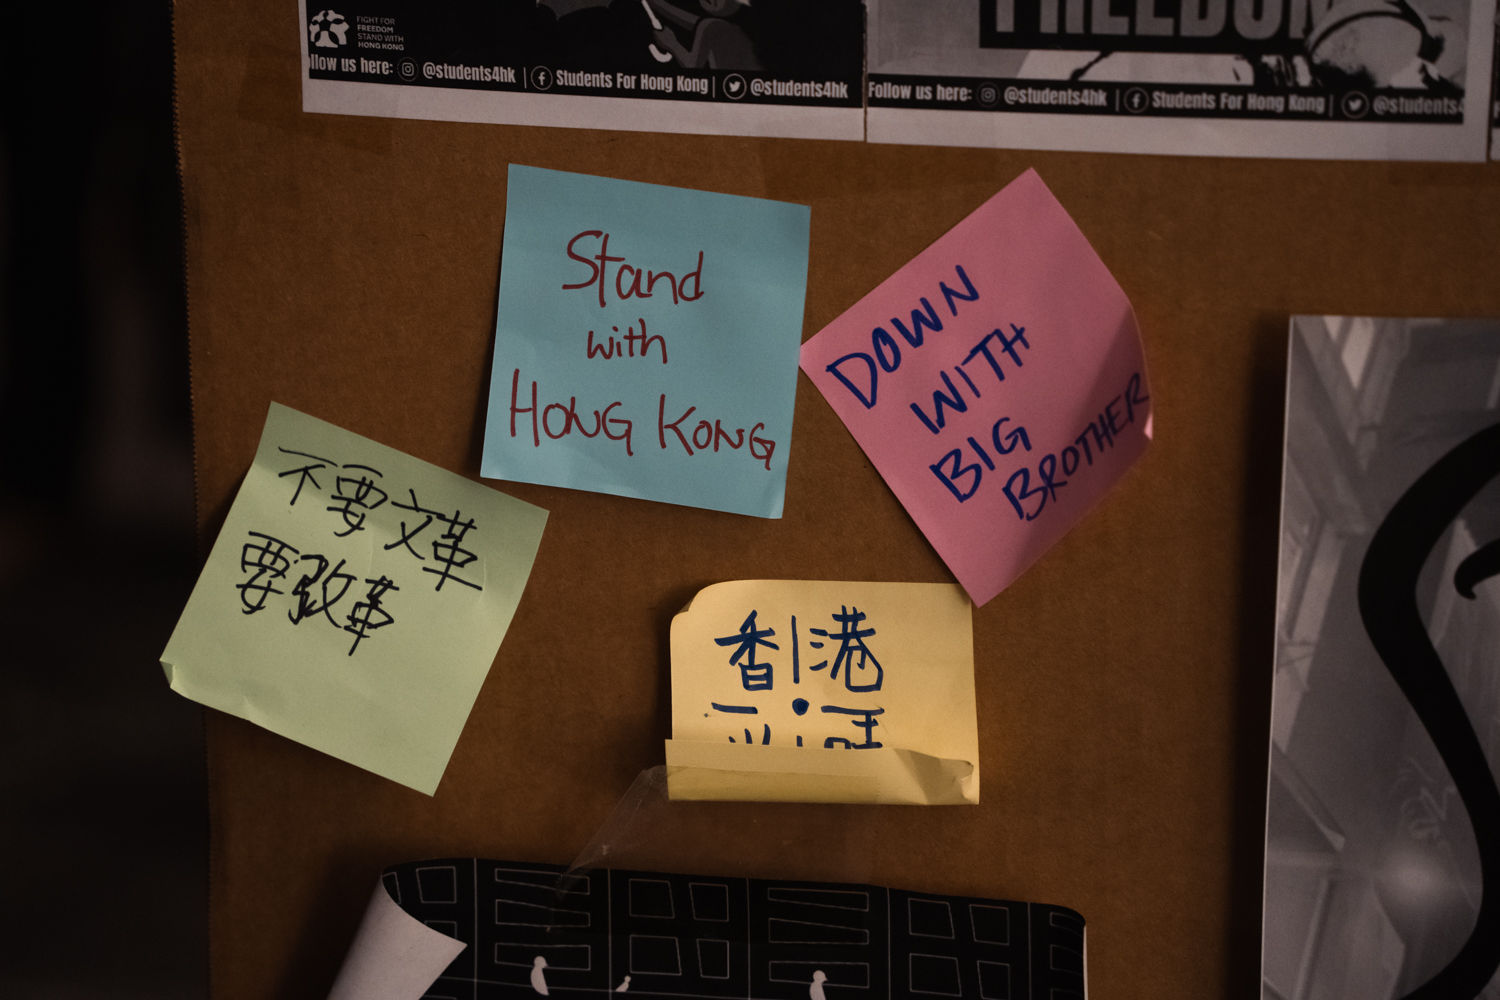 Four sticky notes on cardboard. The green note reads “Say no to cultural revolution, say yes to reform” in simplified Chinese; the blue note reads “Stand with Hong Kong;” the pink note reads “DOWN WITH BIG BROTHER” in all caps; the yellow note reads “Hong Kong” written in Chinese.